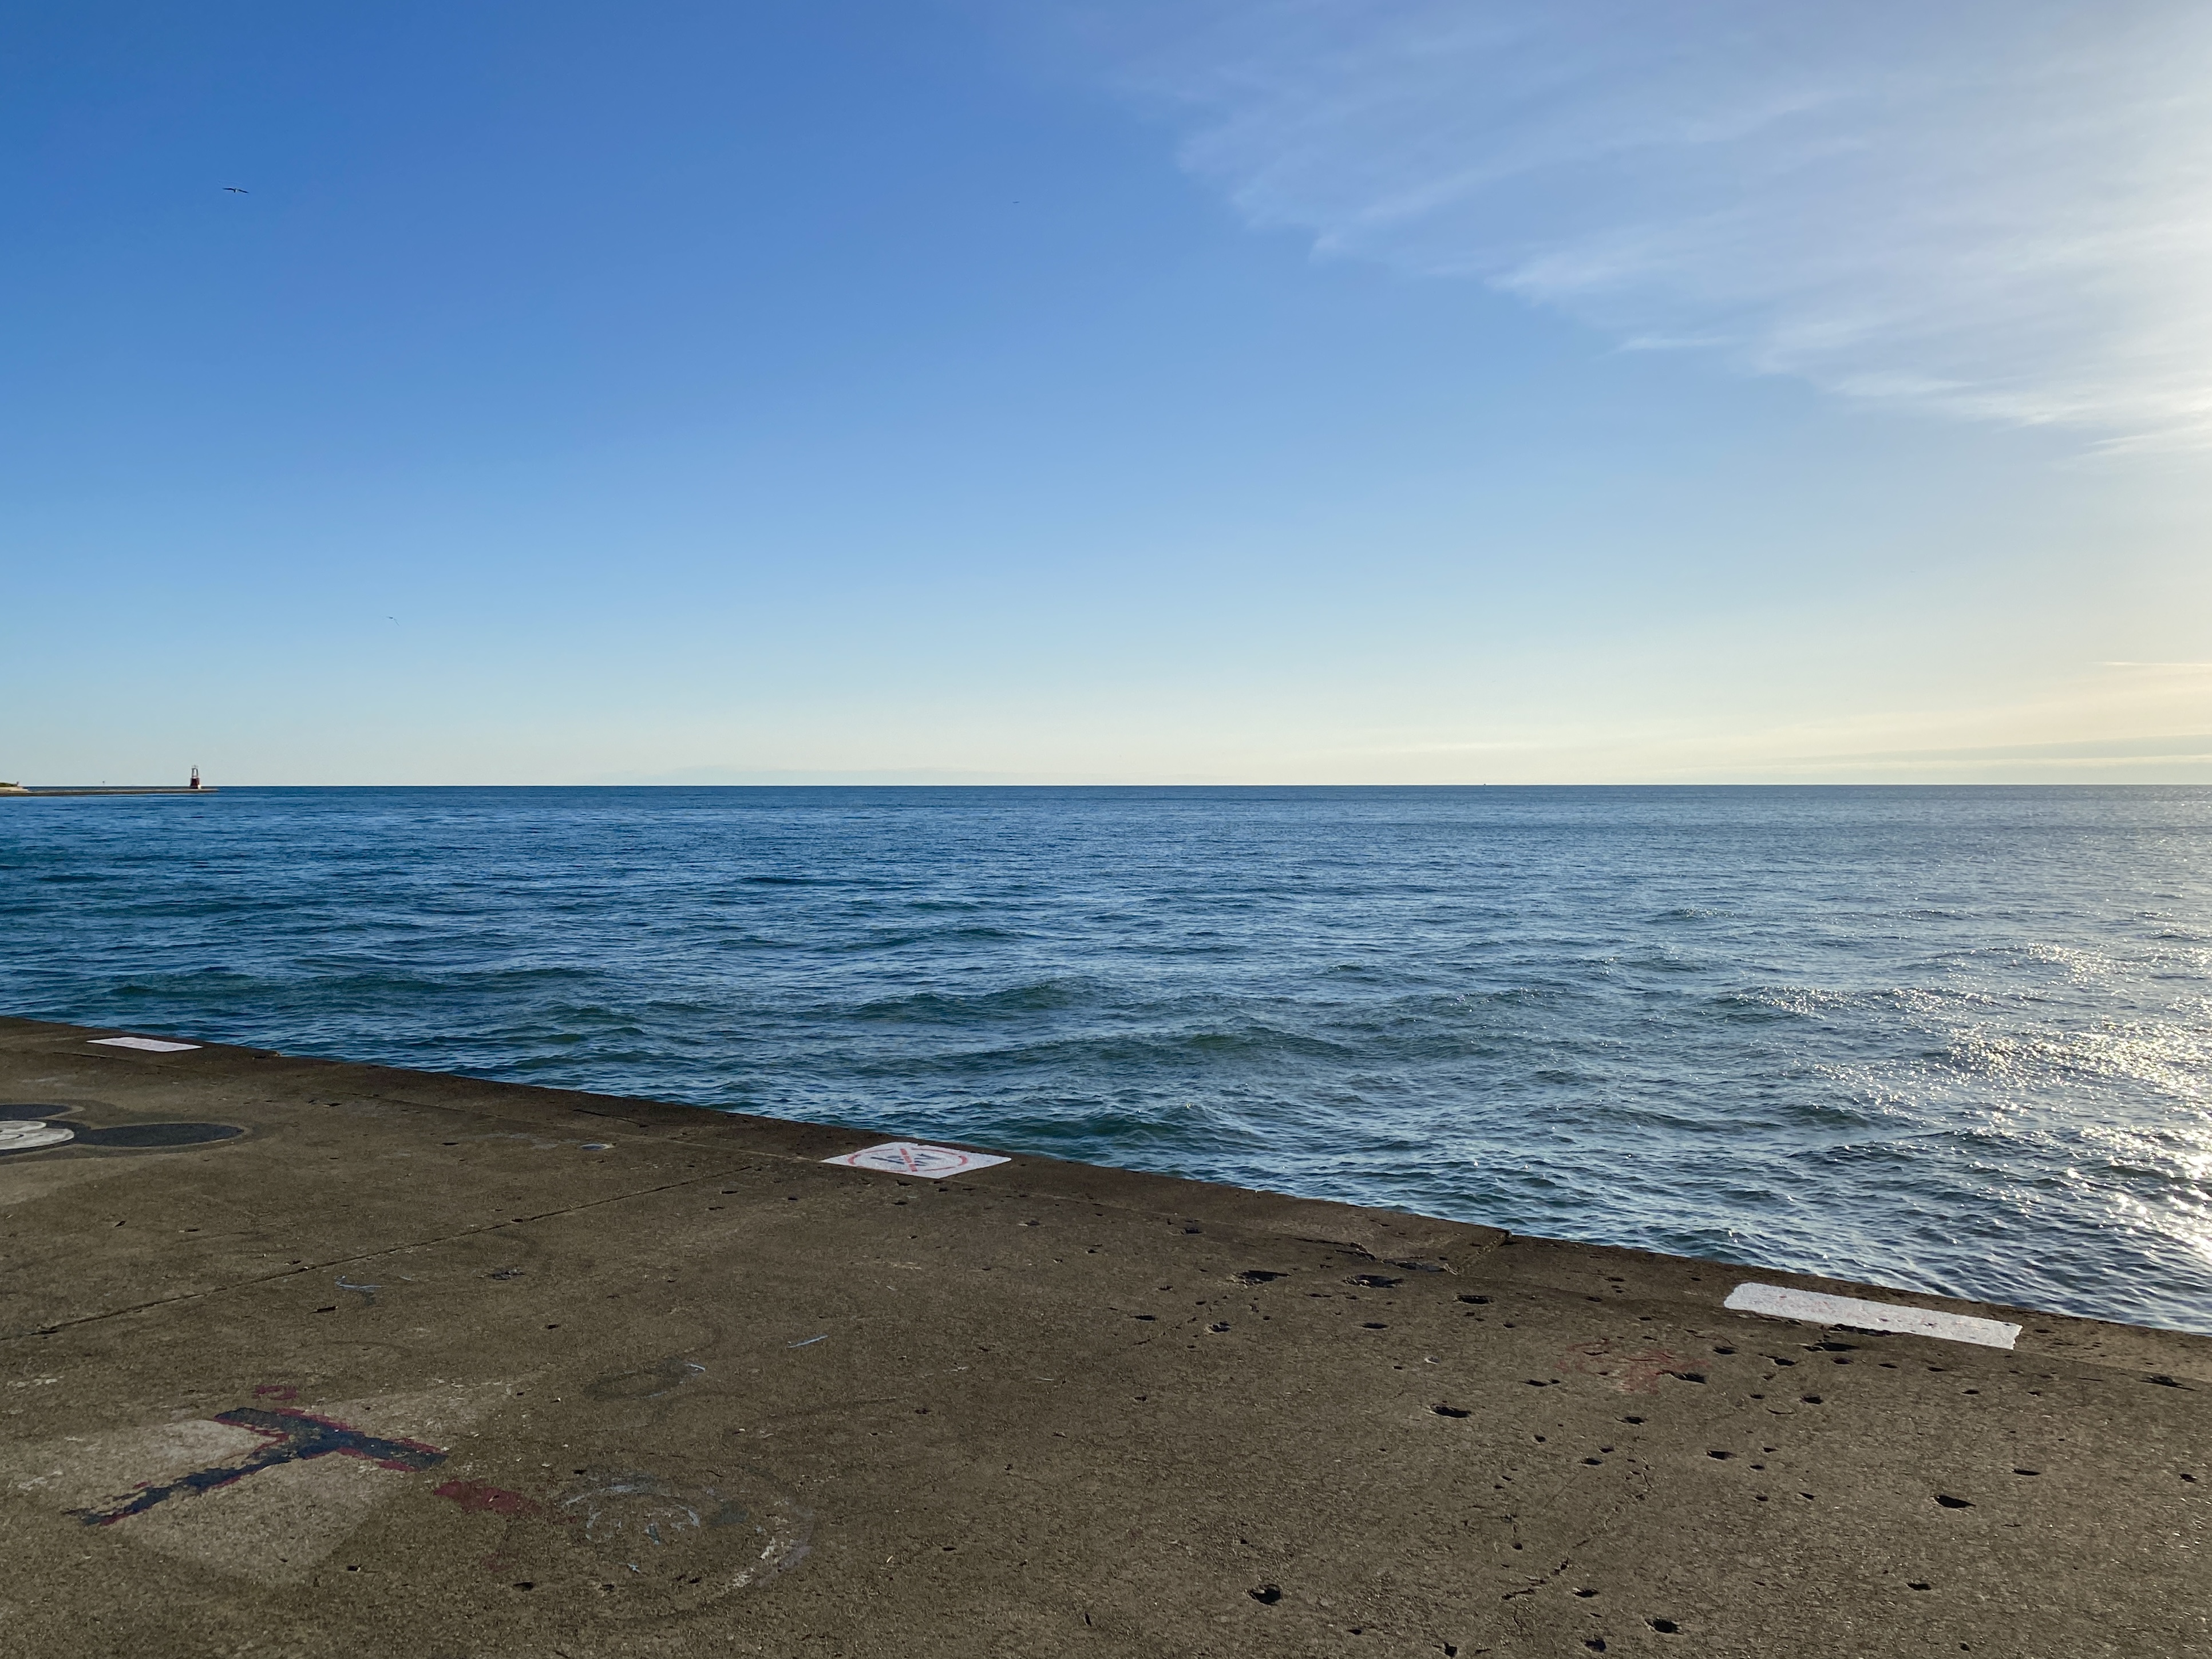 Horizon of a blue sky meeting a large, deep blue lake with small waves, pale yellow light from an early morning sun shining to the left and a strip of concrete angled in the foreground